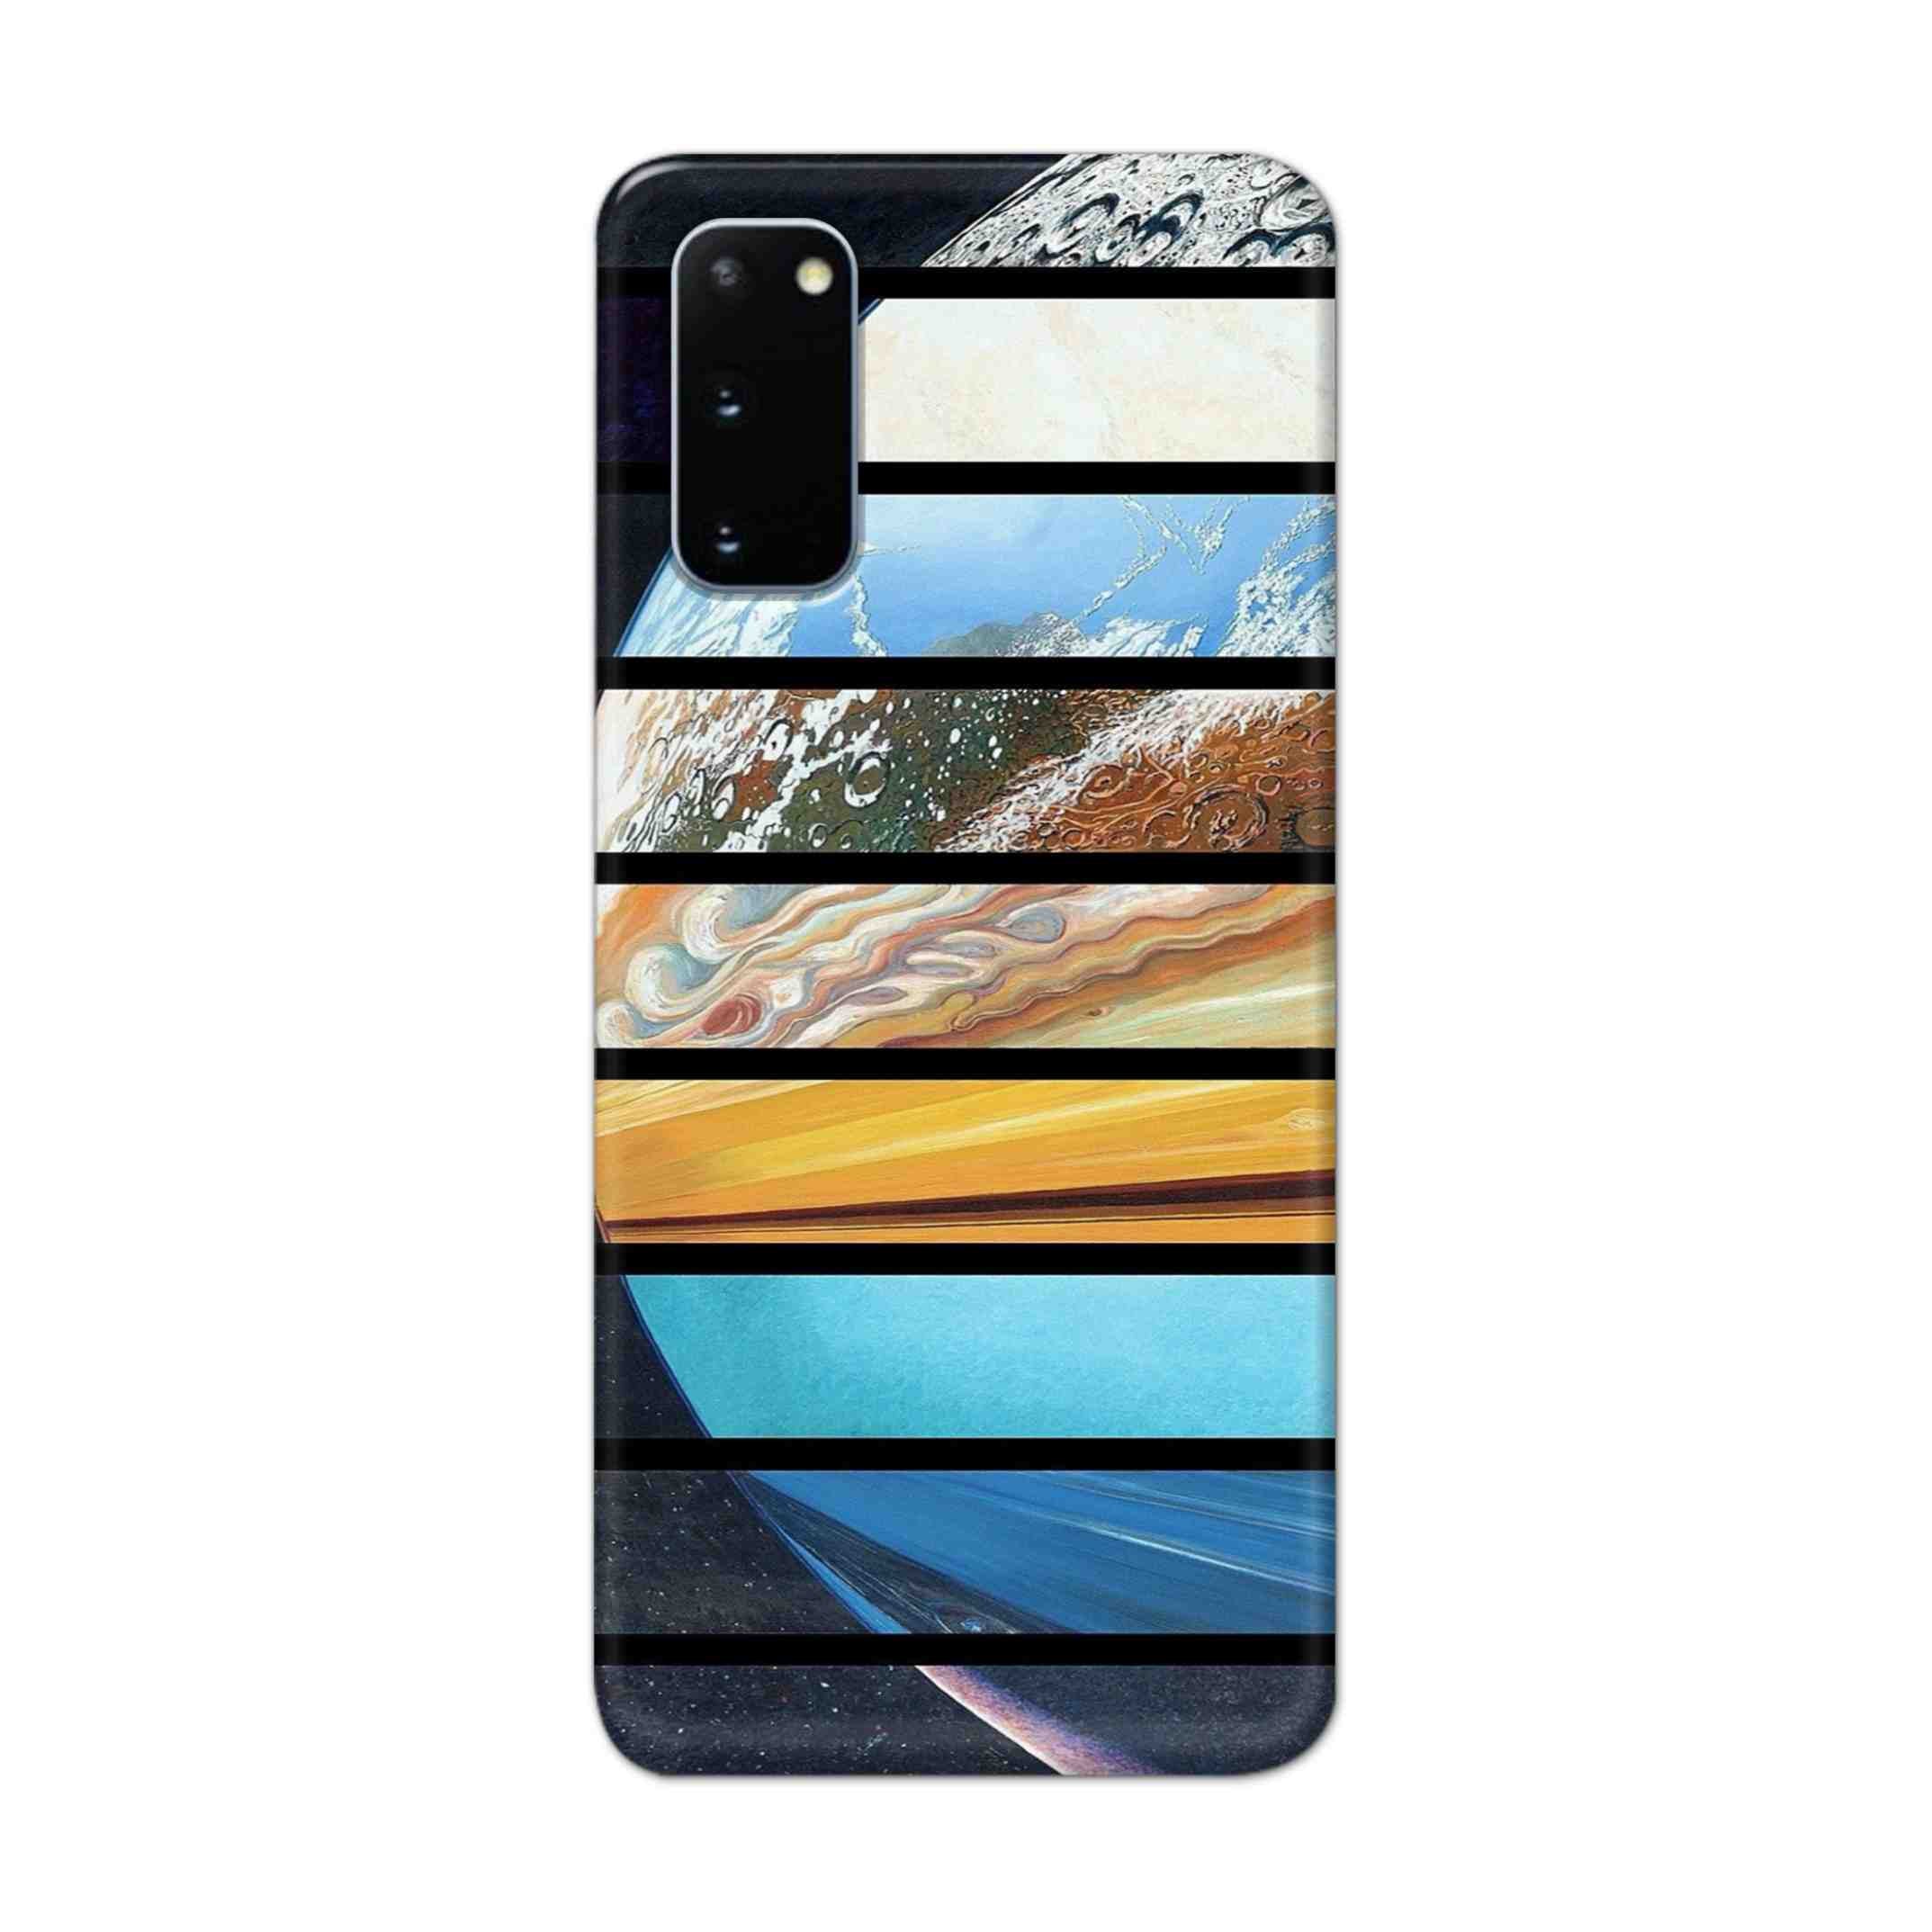 Buy Colourful Earth Hard Back Mobile Phone Case Cover For Samsung Galaxy S20 Online